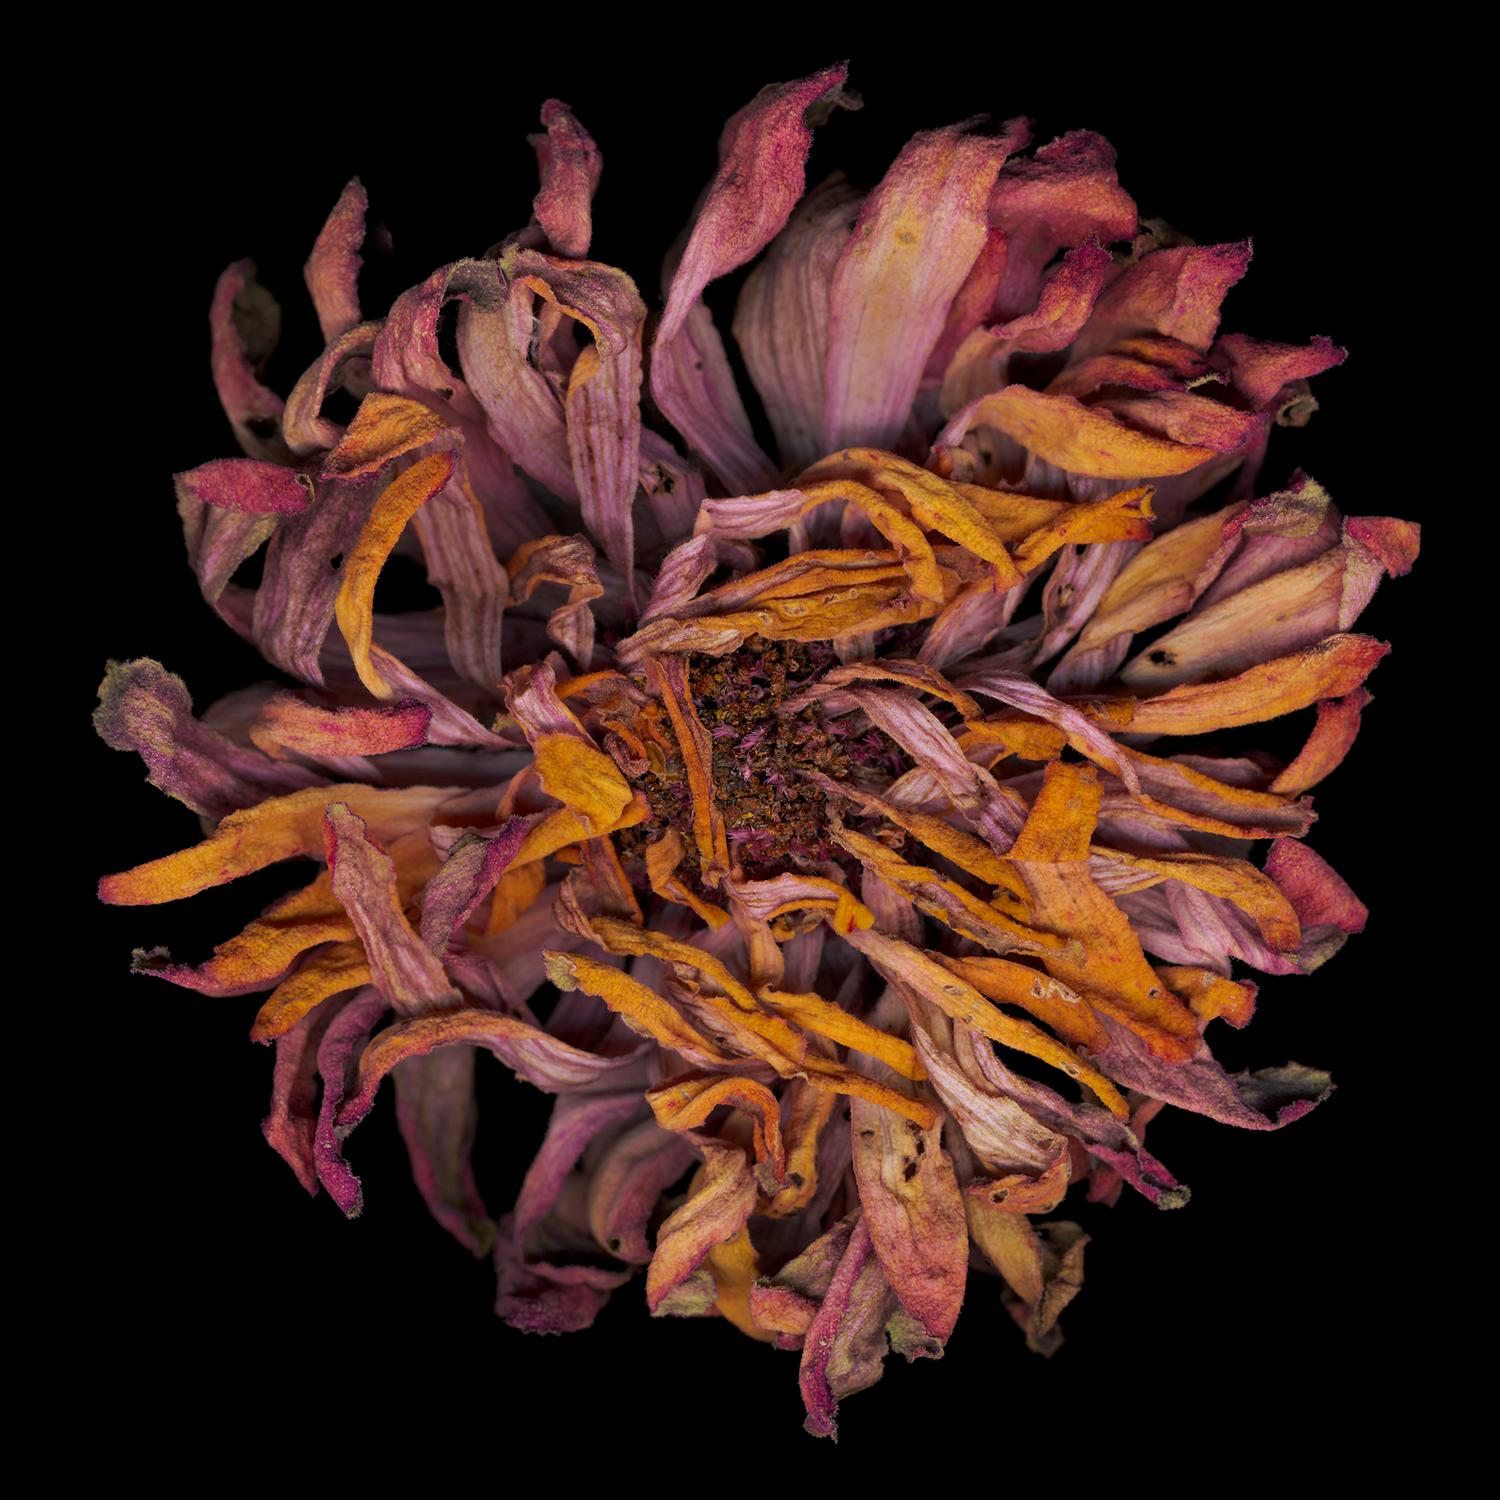 Chad Kleitsch - Untitled Flower # 23, Photography 2002, Printed After